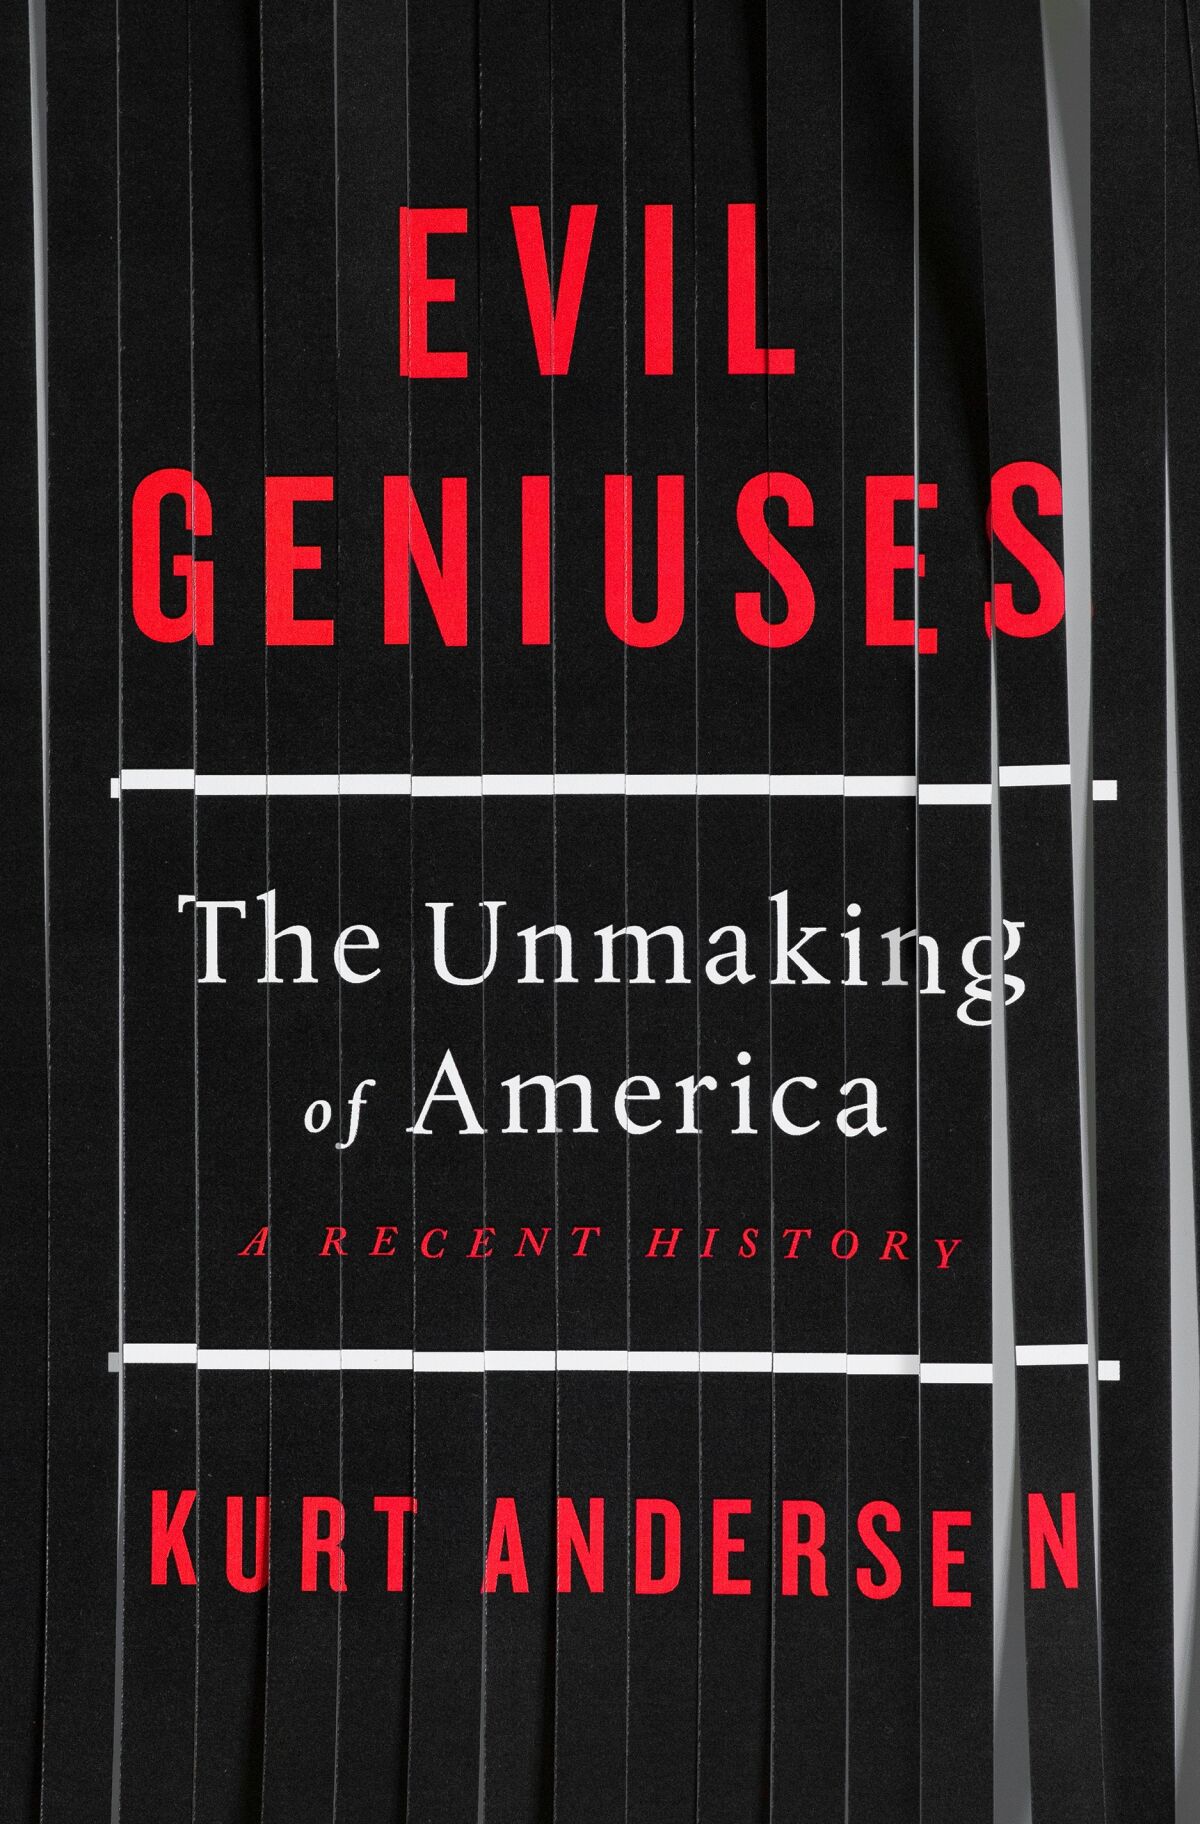 Book jacket for "Evil Geniuses: The Unmaking of America: A Recent History " by Kurt Andersen.